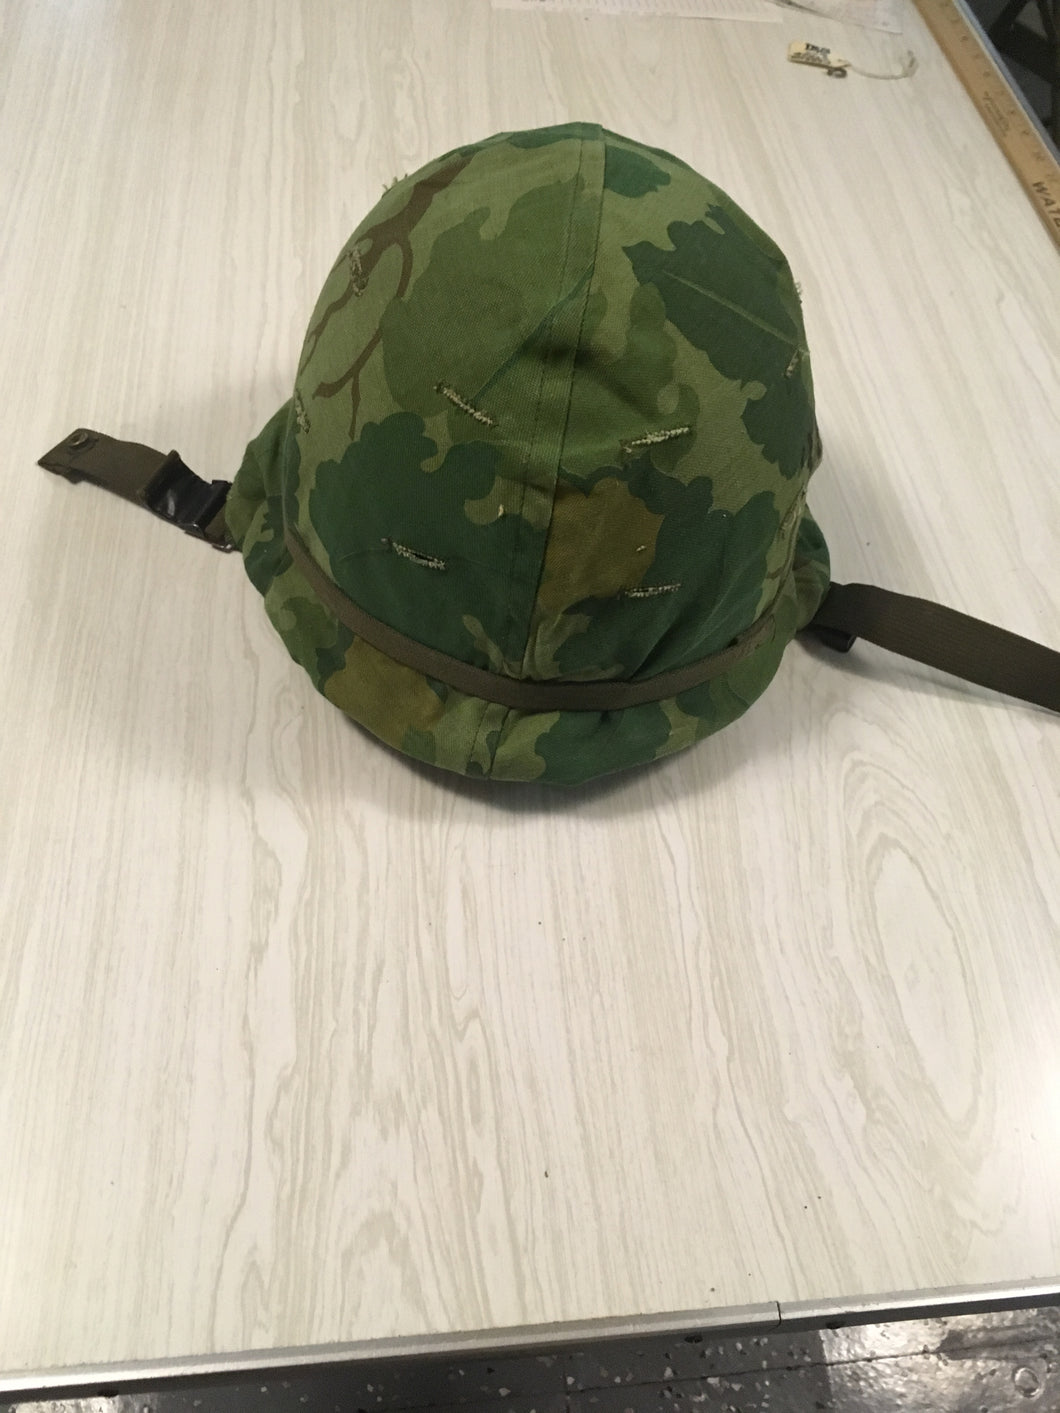 1970 Vietnam Combat Helmet Liner, Pot and Early 1965 # 81116 Reversible Cover / Used Condition